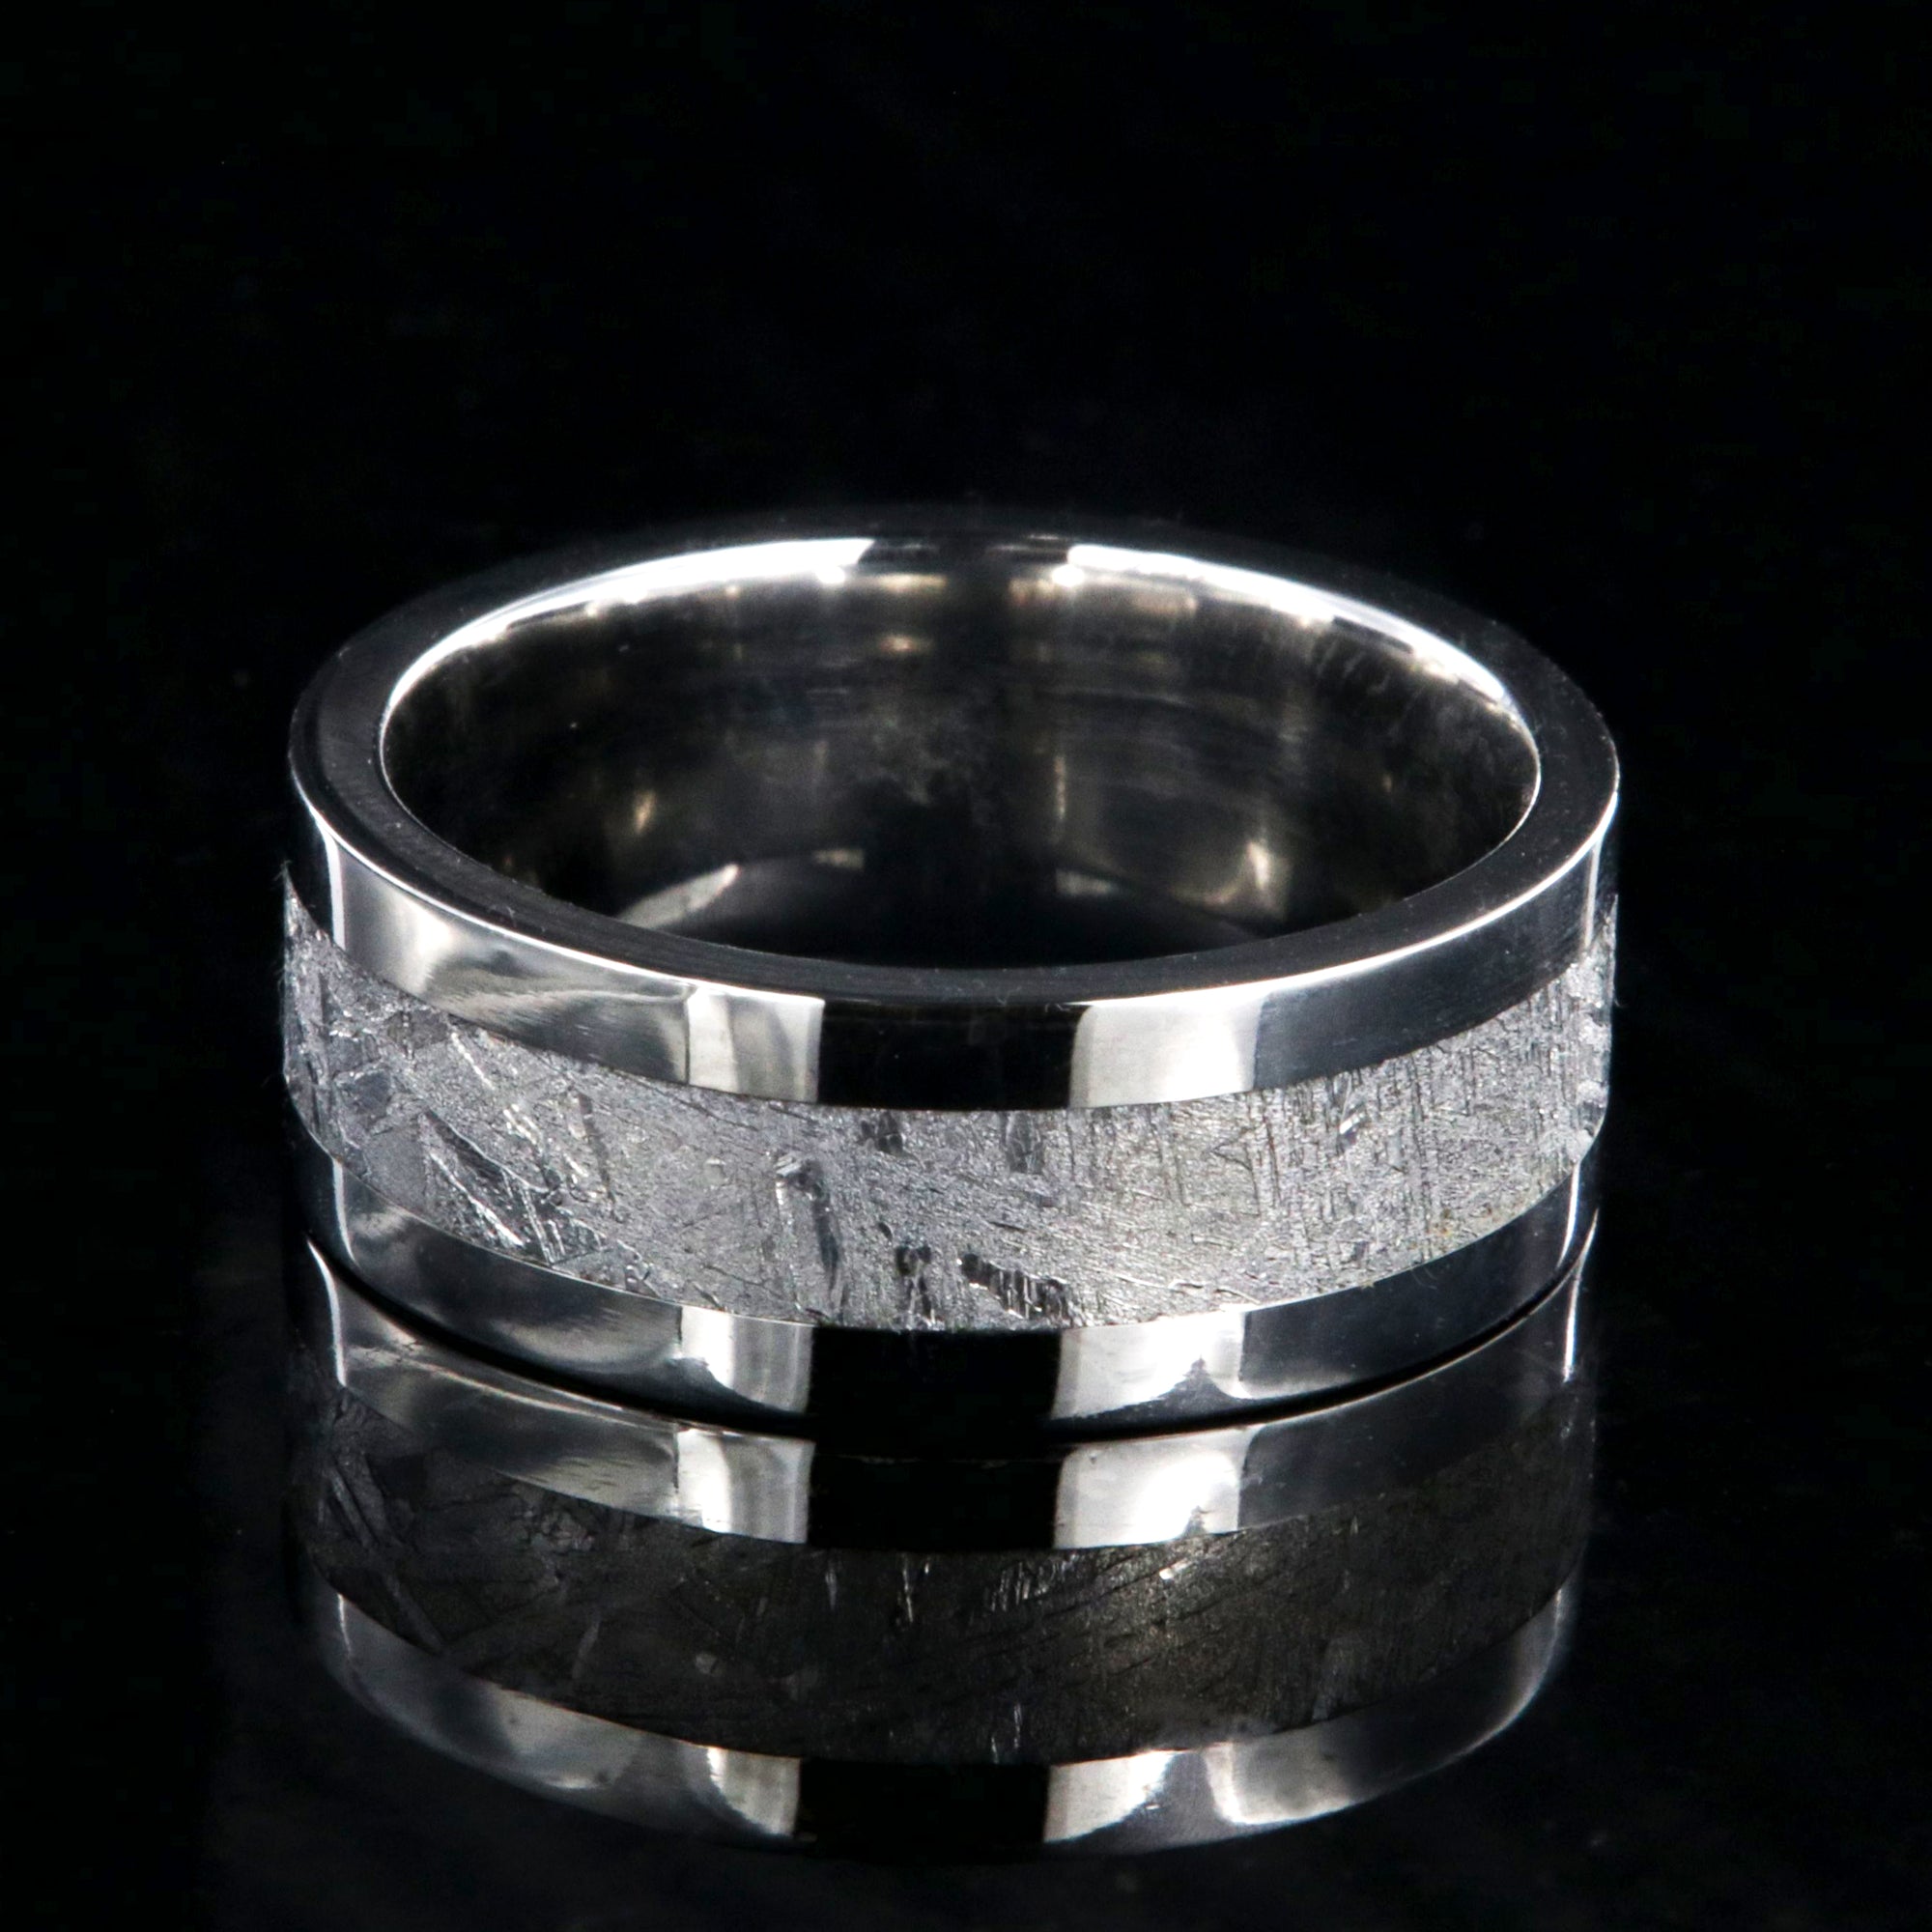 8mm wide men's wedding ring with a center of Gibeon meteorite and wide polished cobalt edges and sleeve